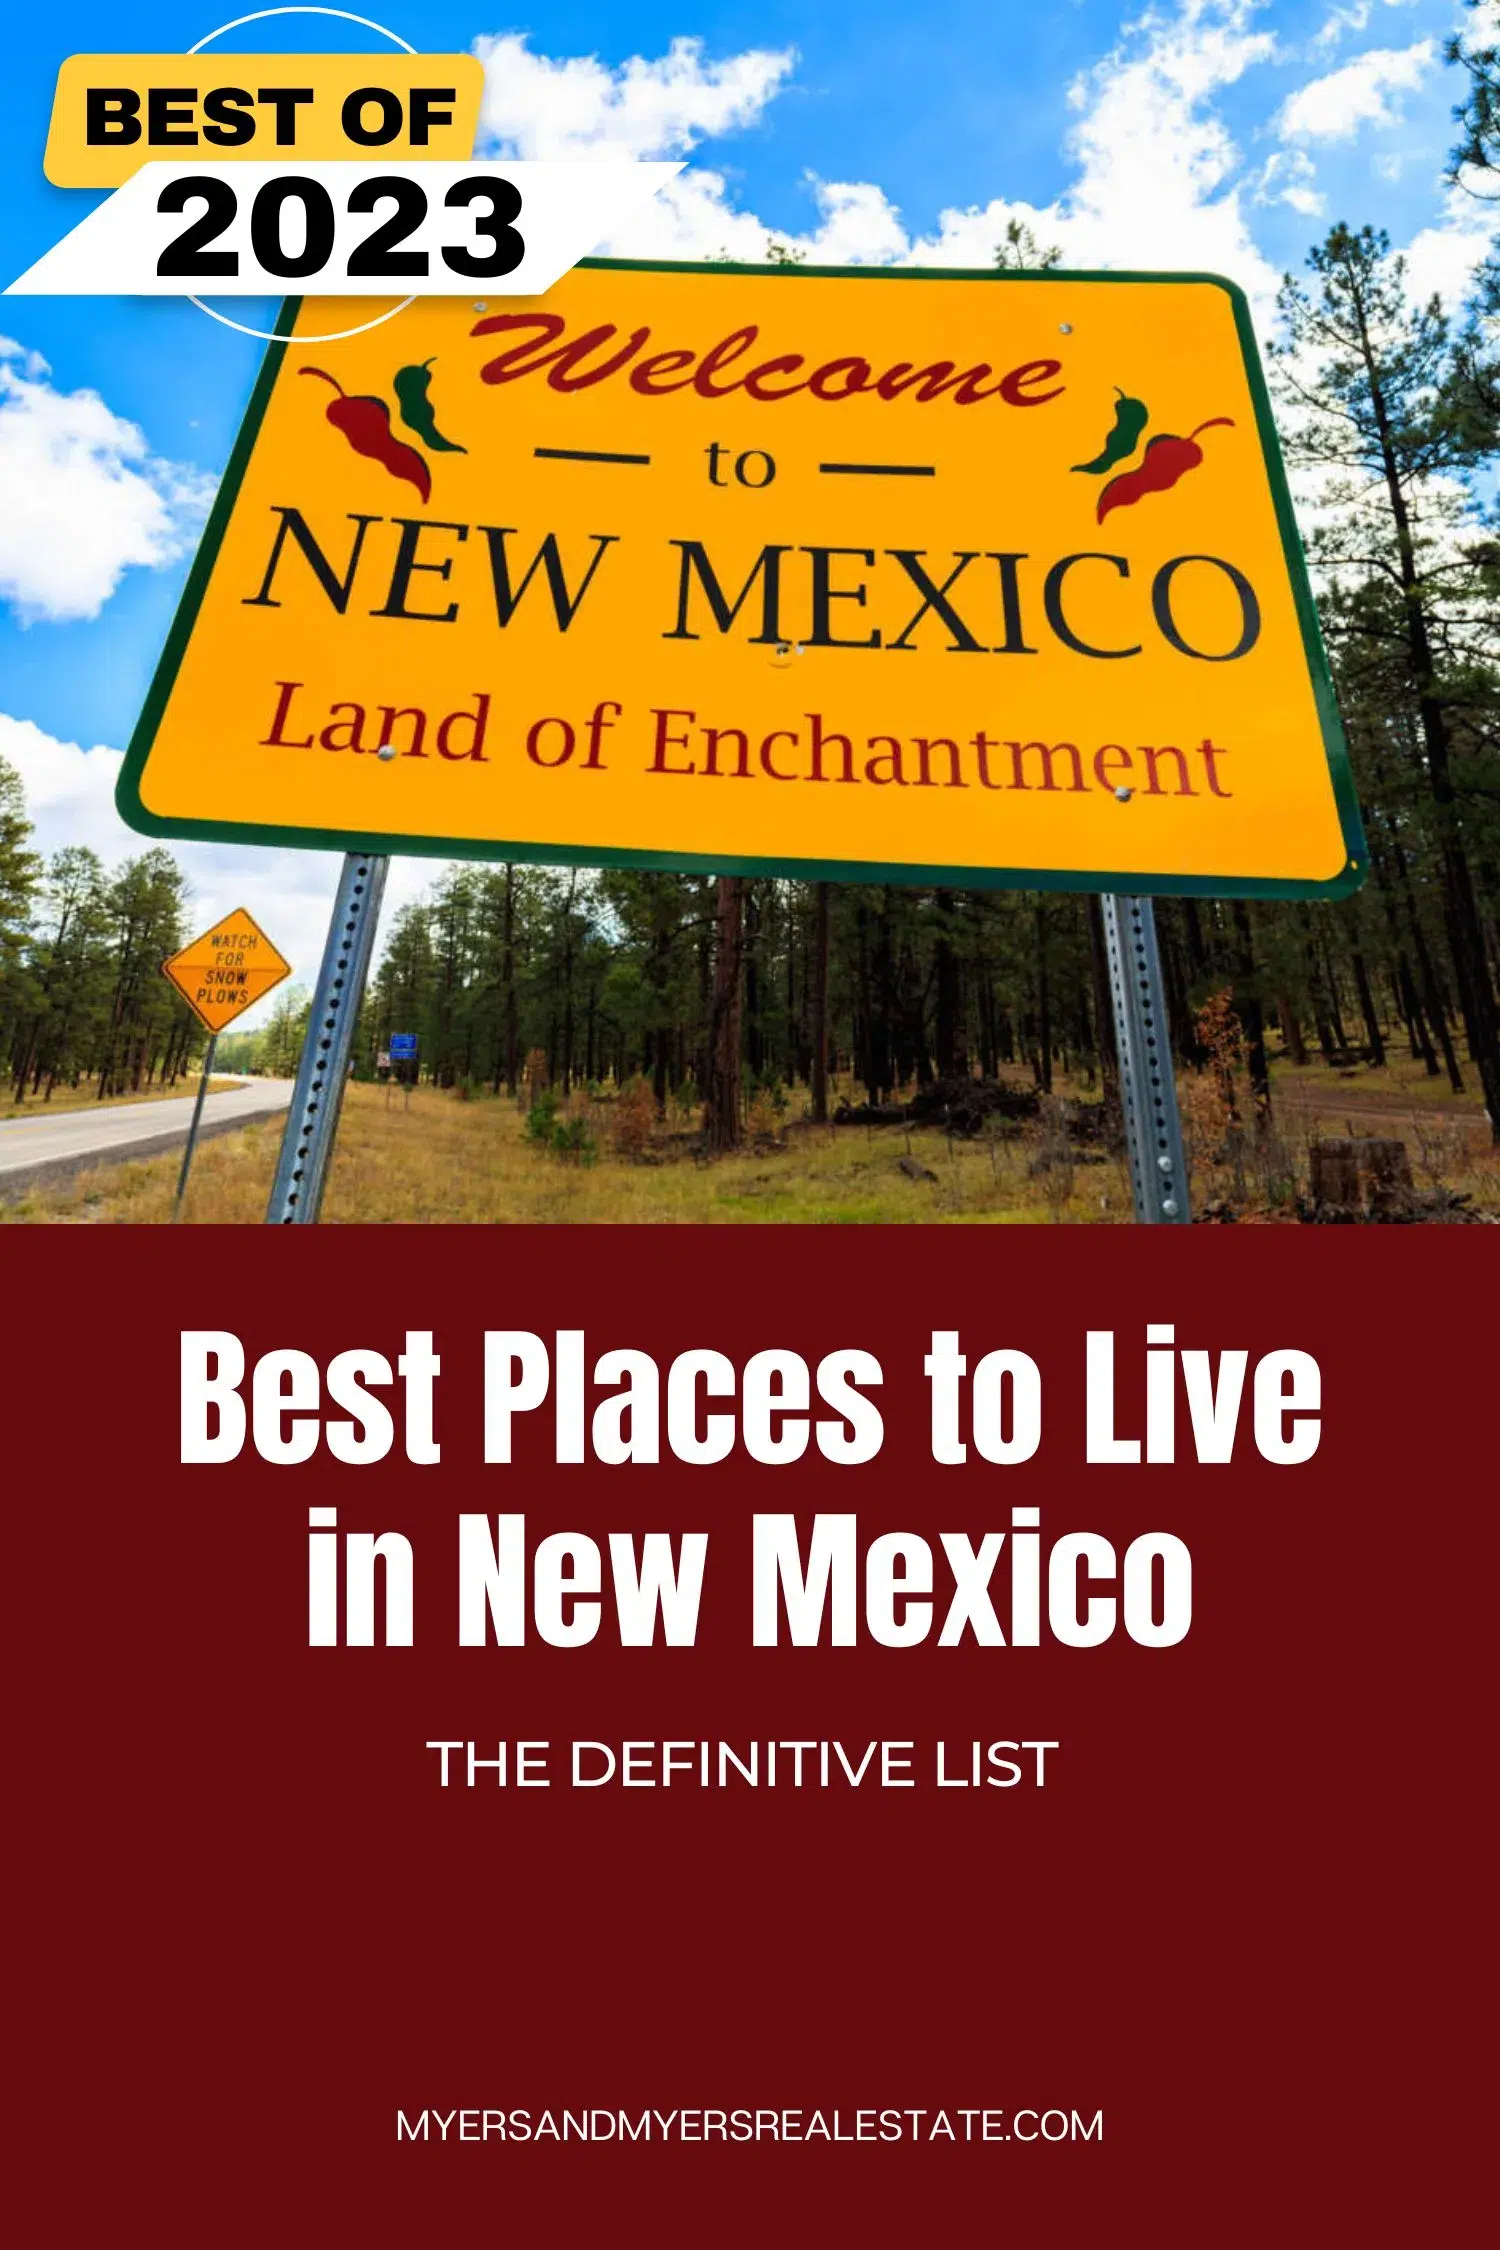 Best Places to Live in New Mexico The Definitive List 2023